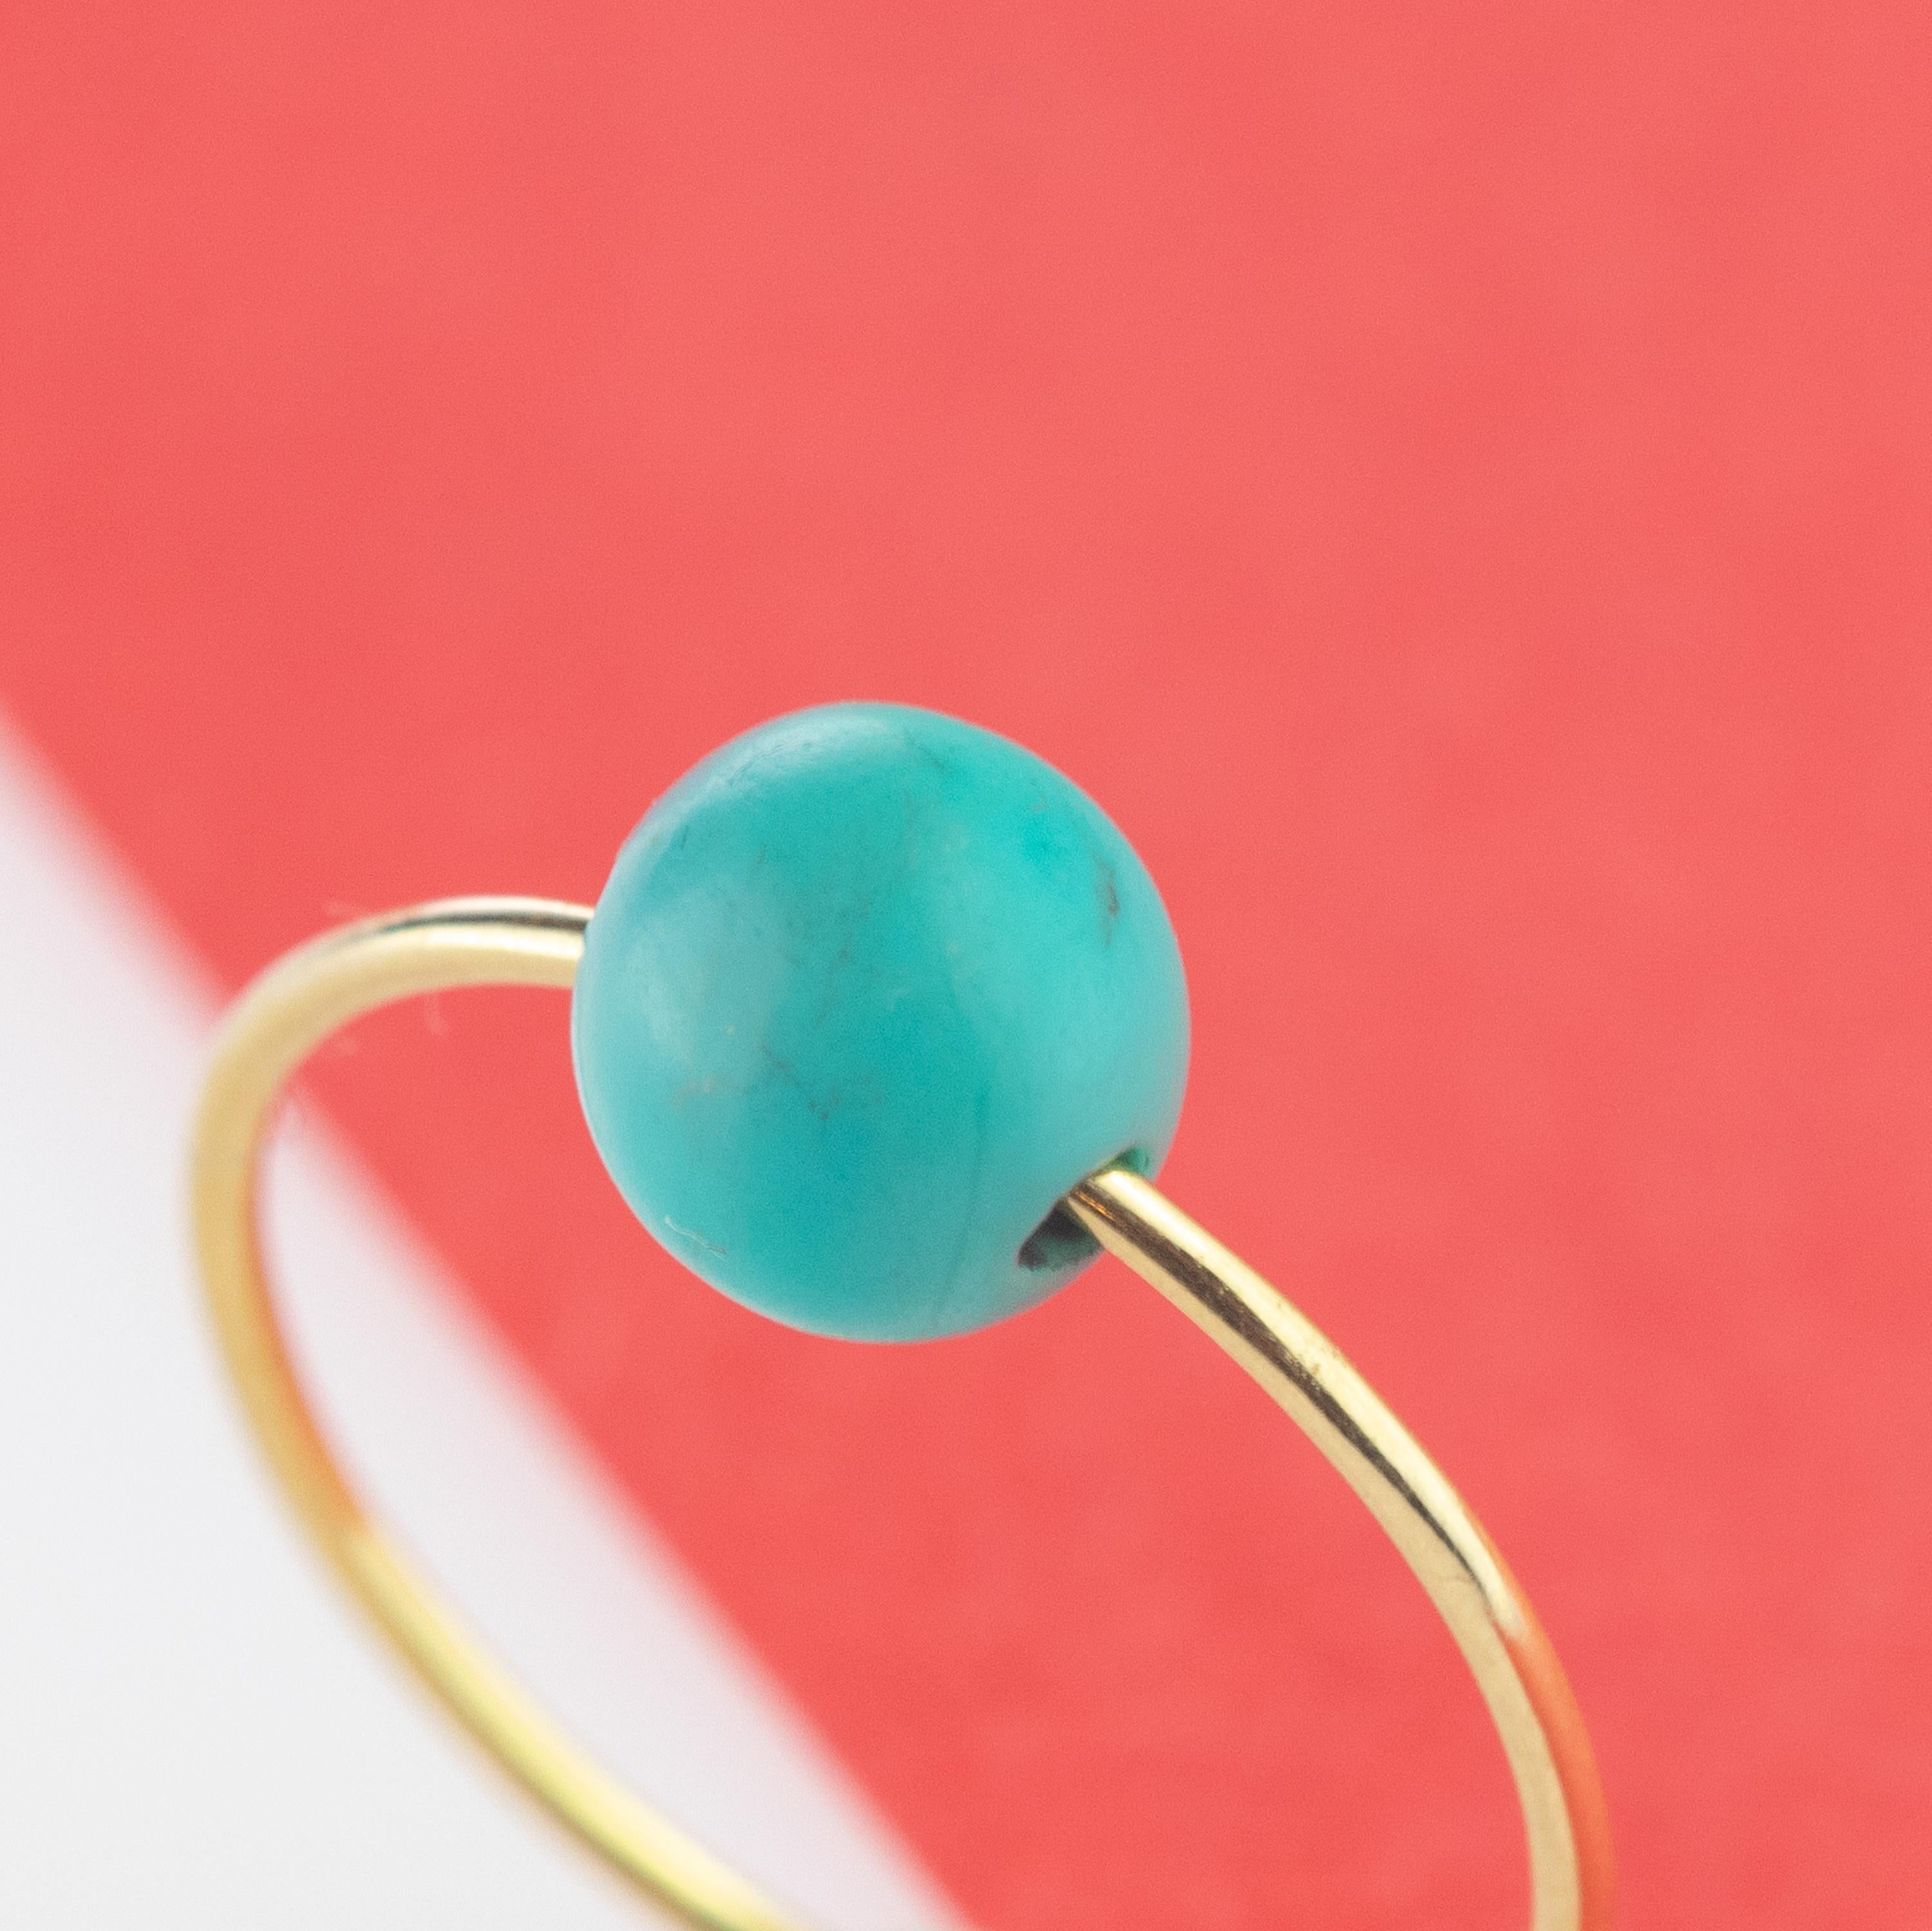 Signature INTINI Jewels Neptune Planet band ring. Contemporary ring design in 18 karat yellow gold with a precious round turquoise.  Design and color mixed in one jewel. Delight yourself with a strong, minimalist design, just for a stunning chic